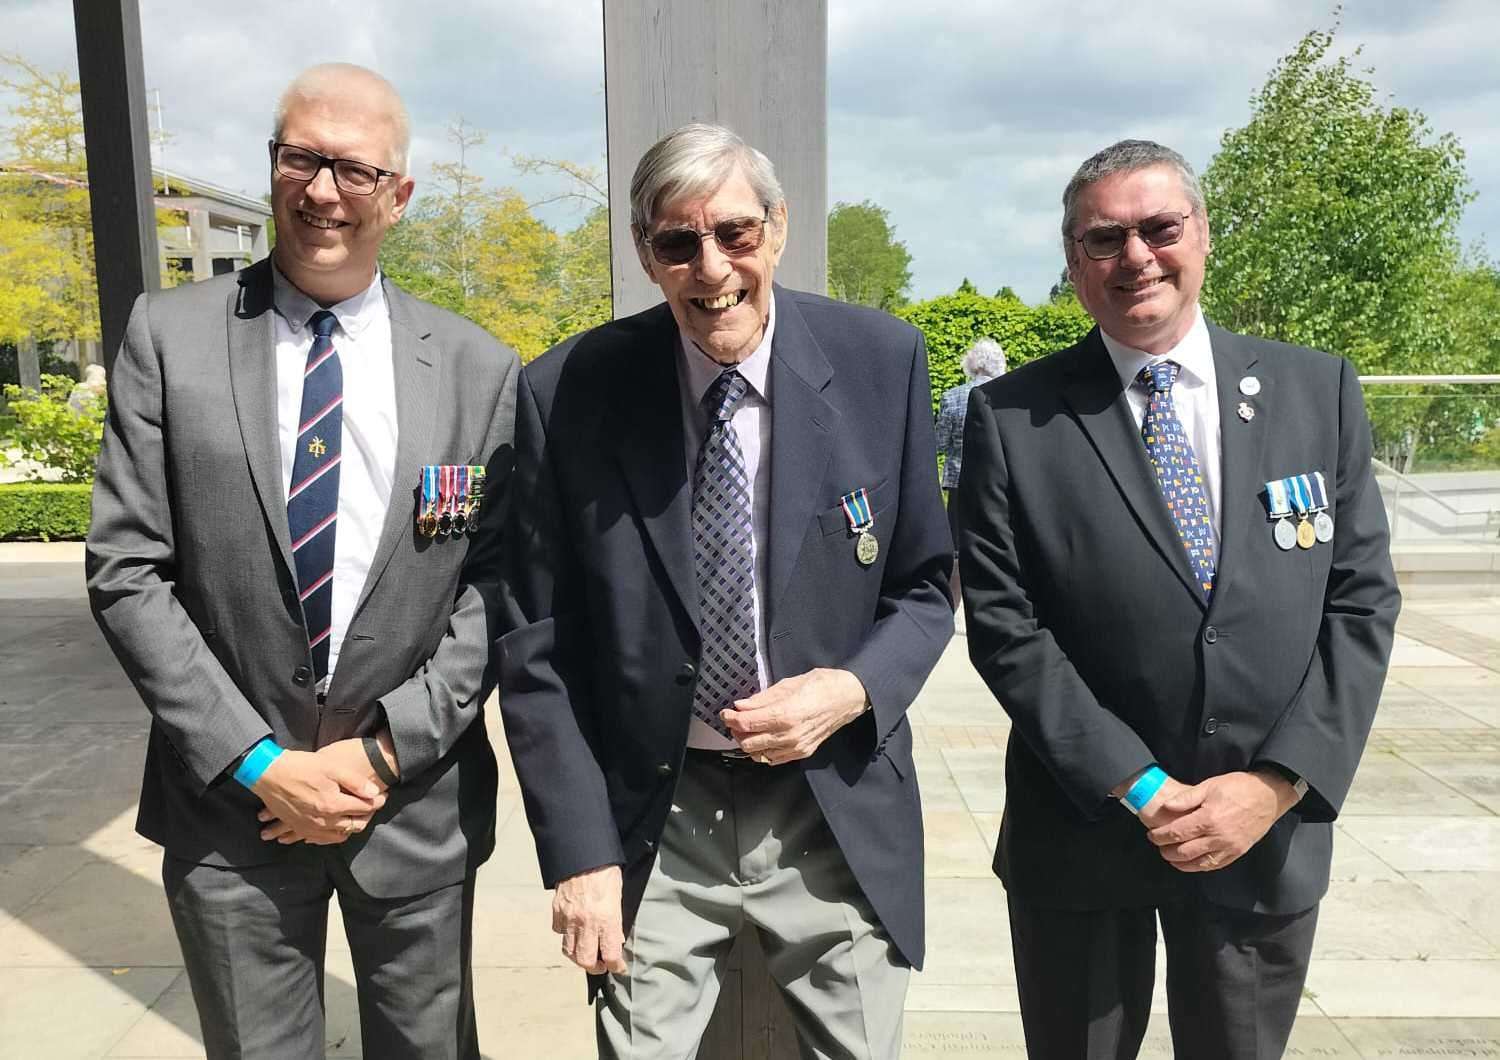 Brian Fuller, with sons Keith (left) and Michael, at the National Memorial Arboretum in Staffordshire, for the celebrations to mark 60 years since the end of National Service